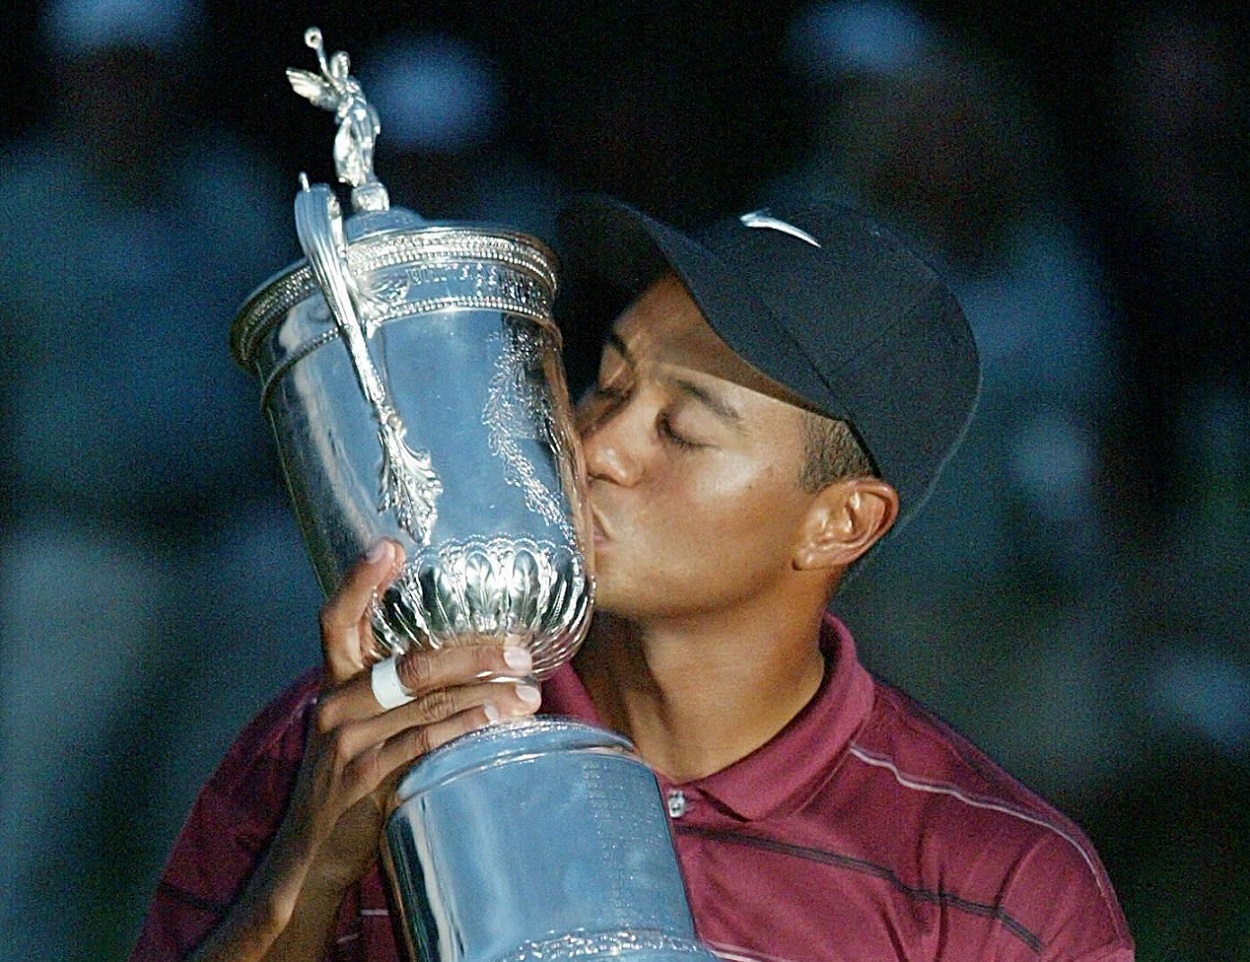 Tiger Woods kisses the U.S. Open trophy following his victory at Bethpage Black in 2002